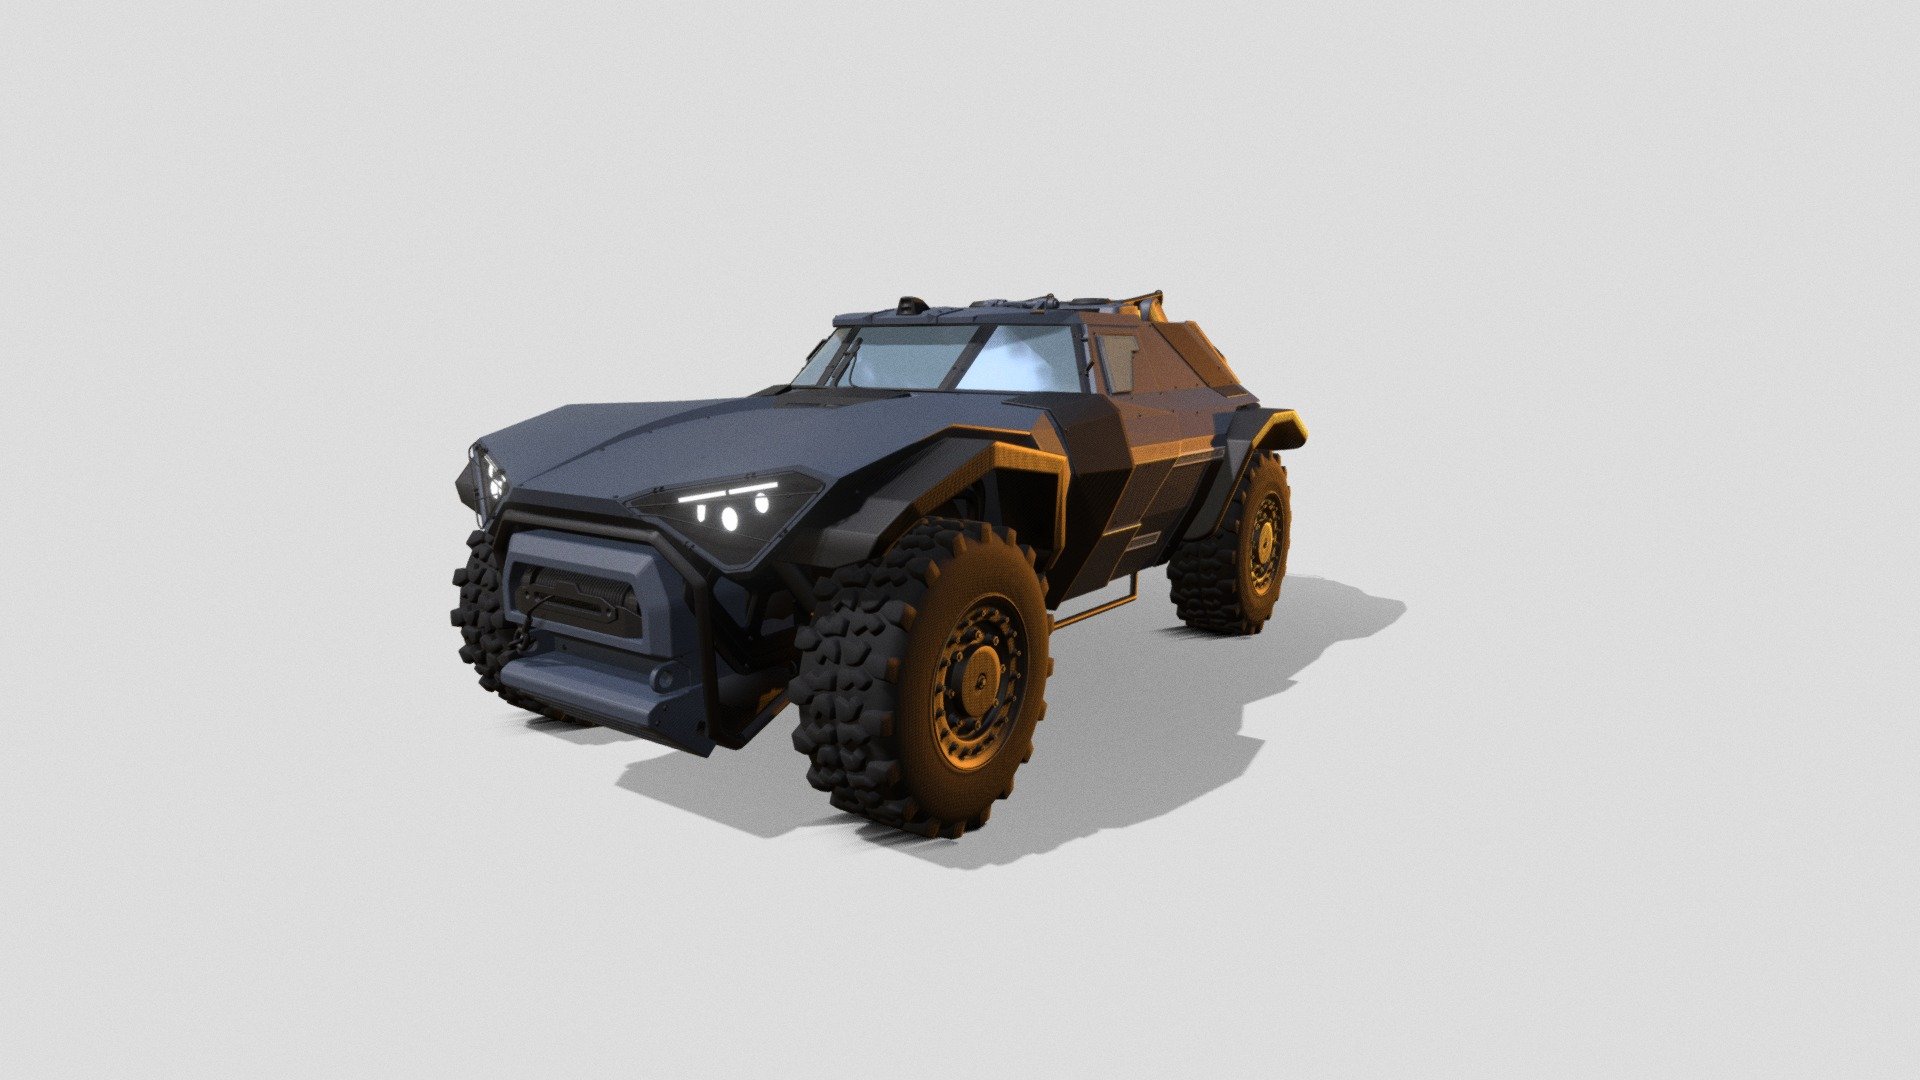 Based somewhat of the Scarabee military vehicle 3d model